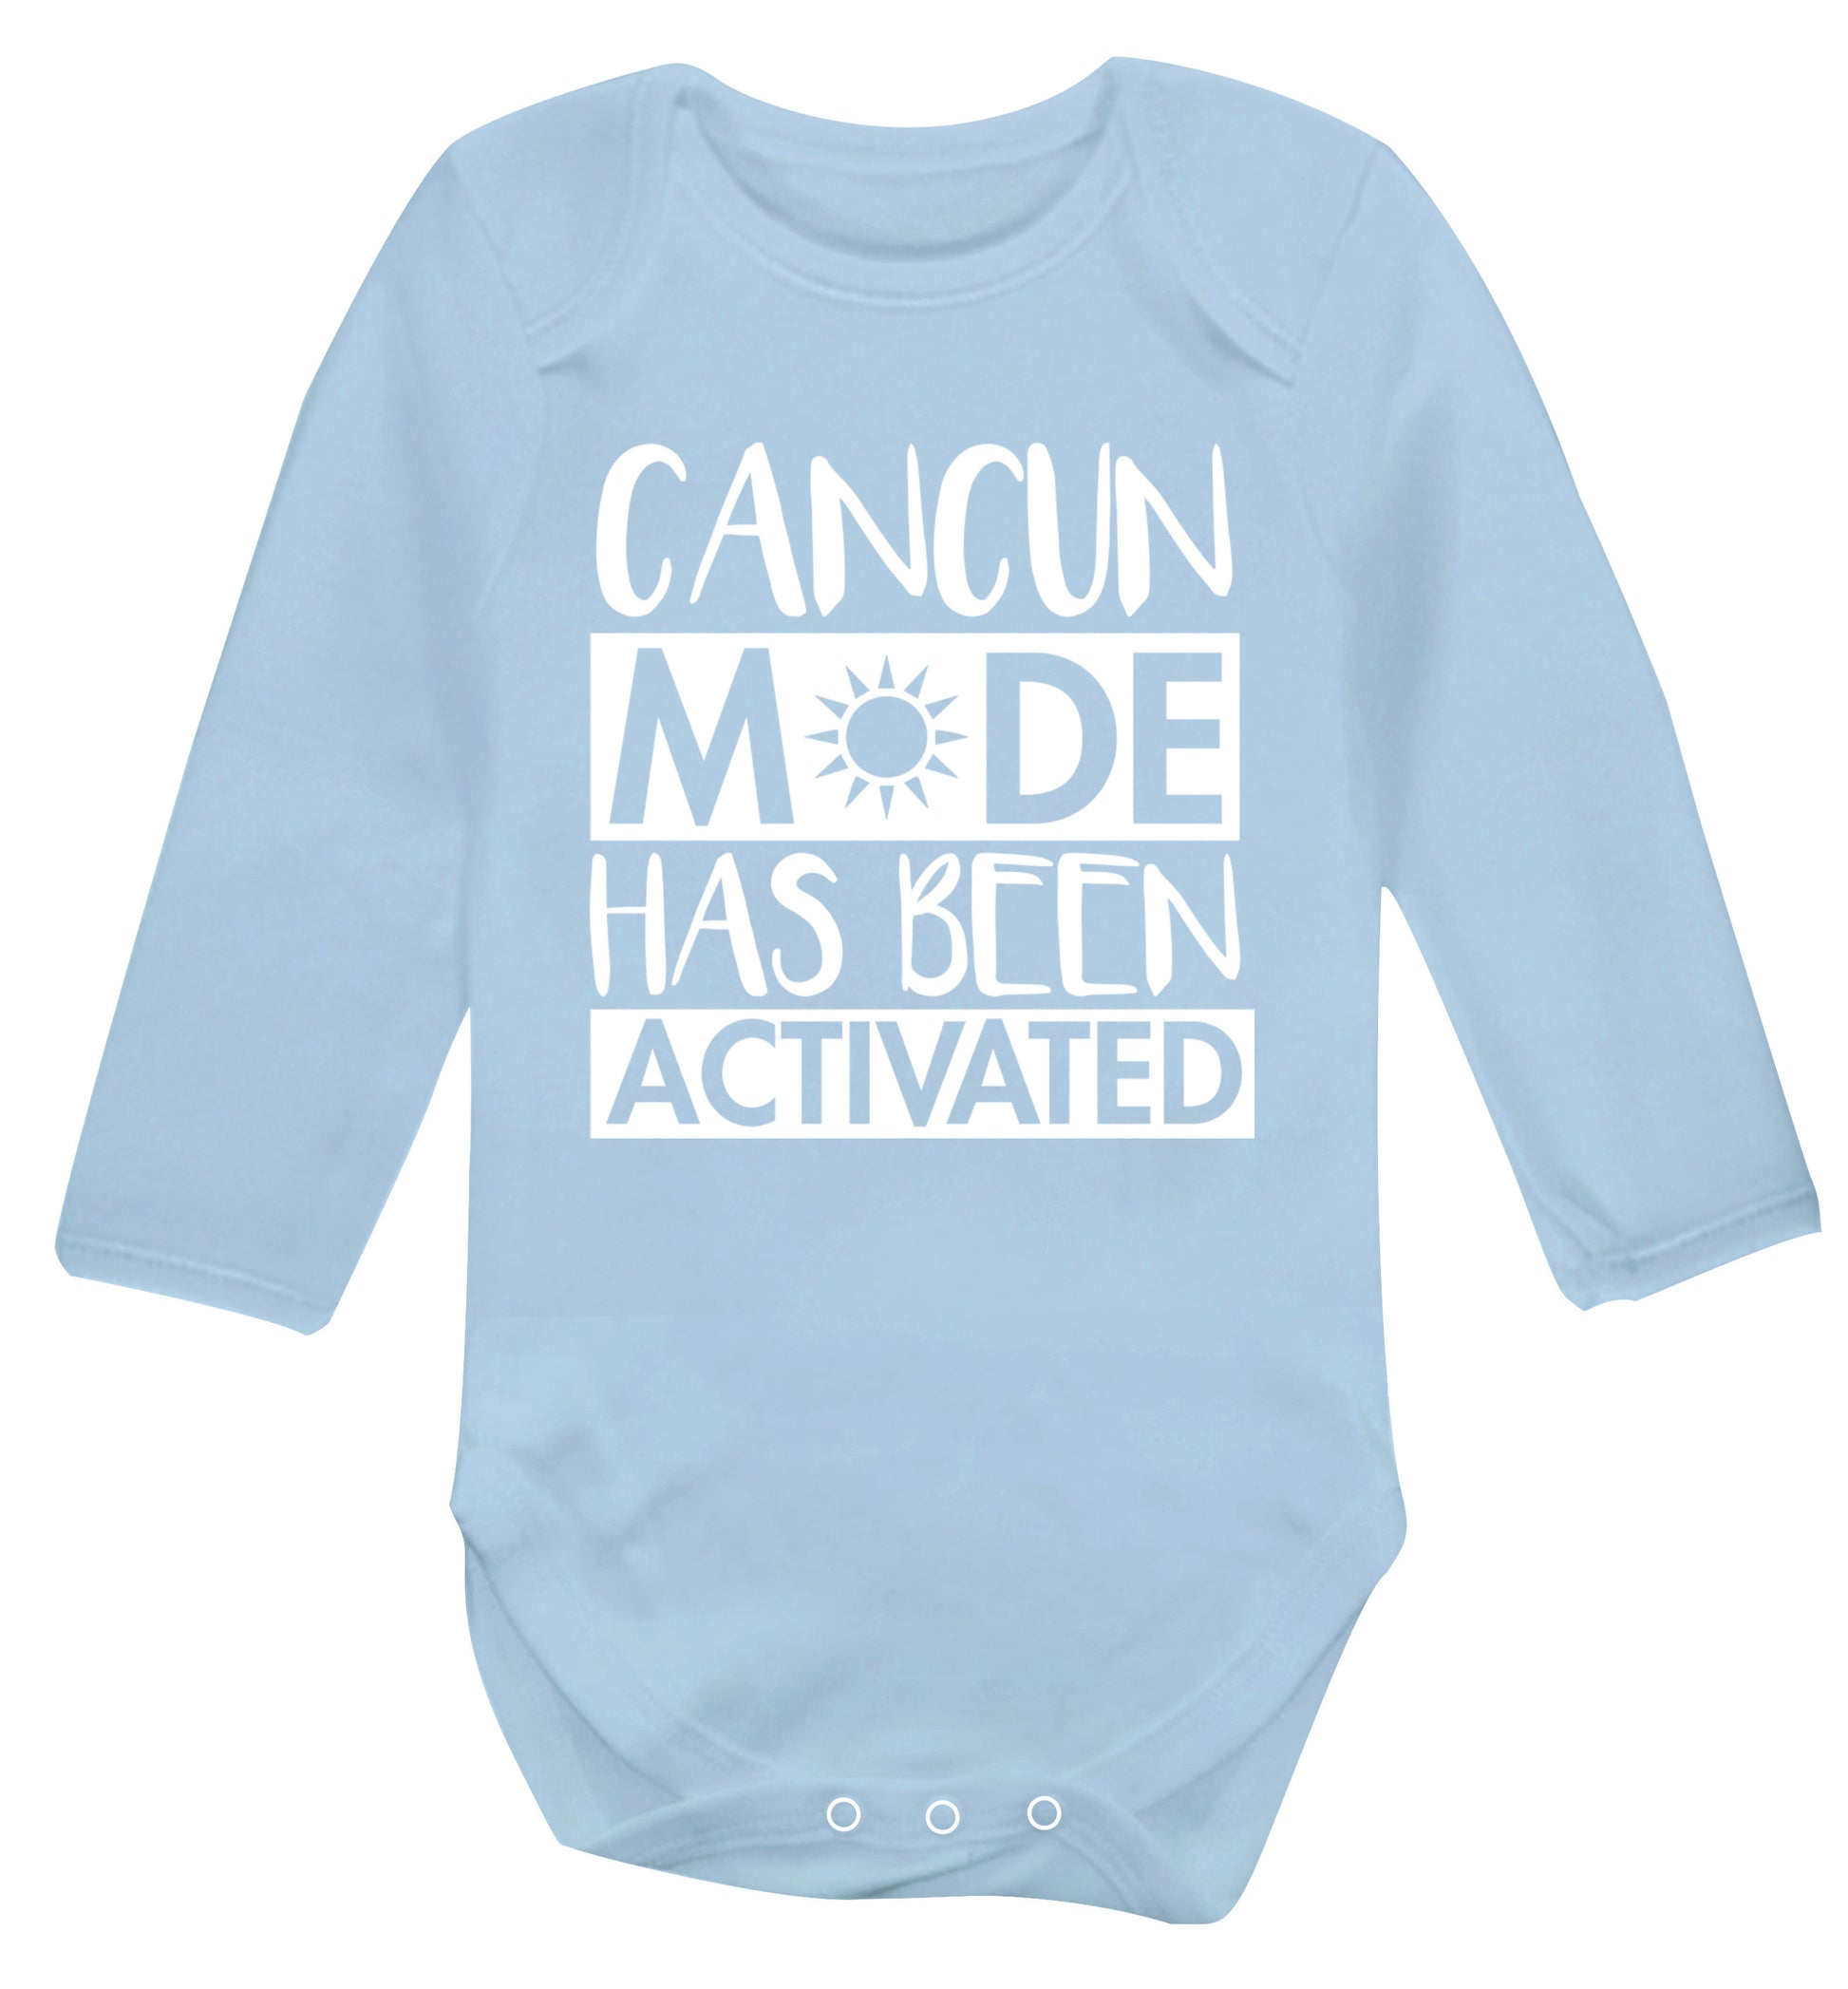 Cancun mode has been activated Baby Vest long sleeved pale blue 6-12 months